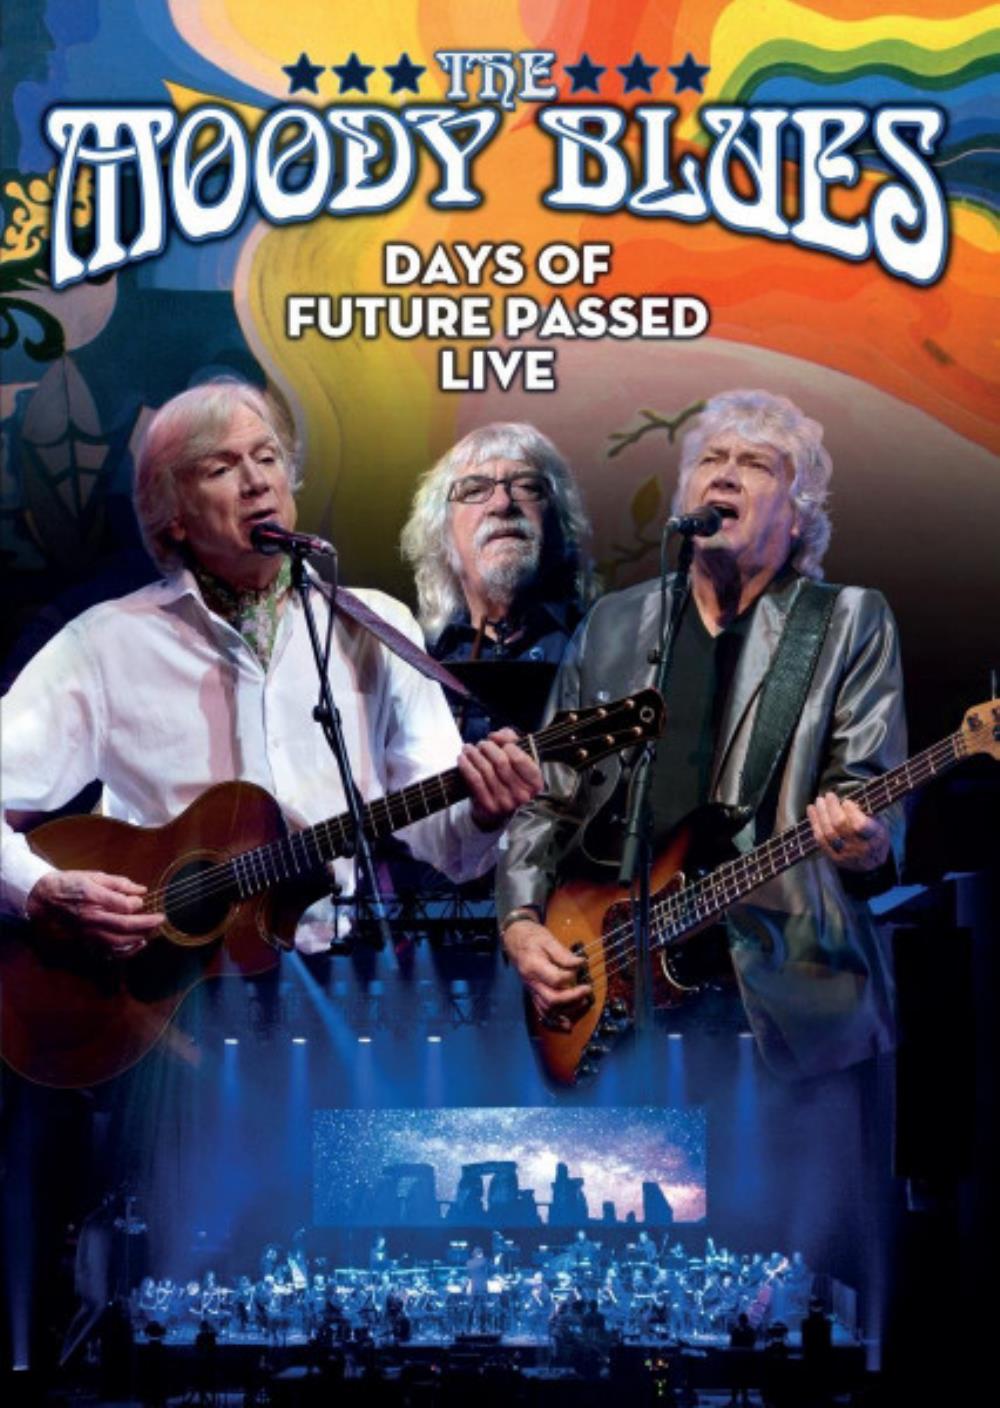 The Moody Blues Days of Future Passed Live album cover